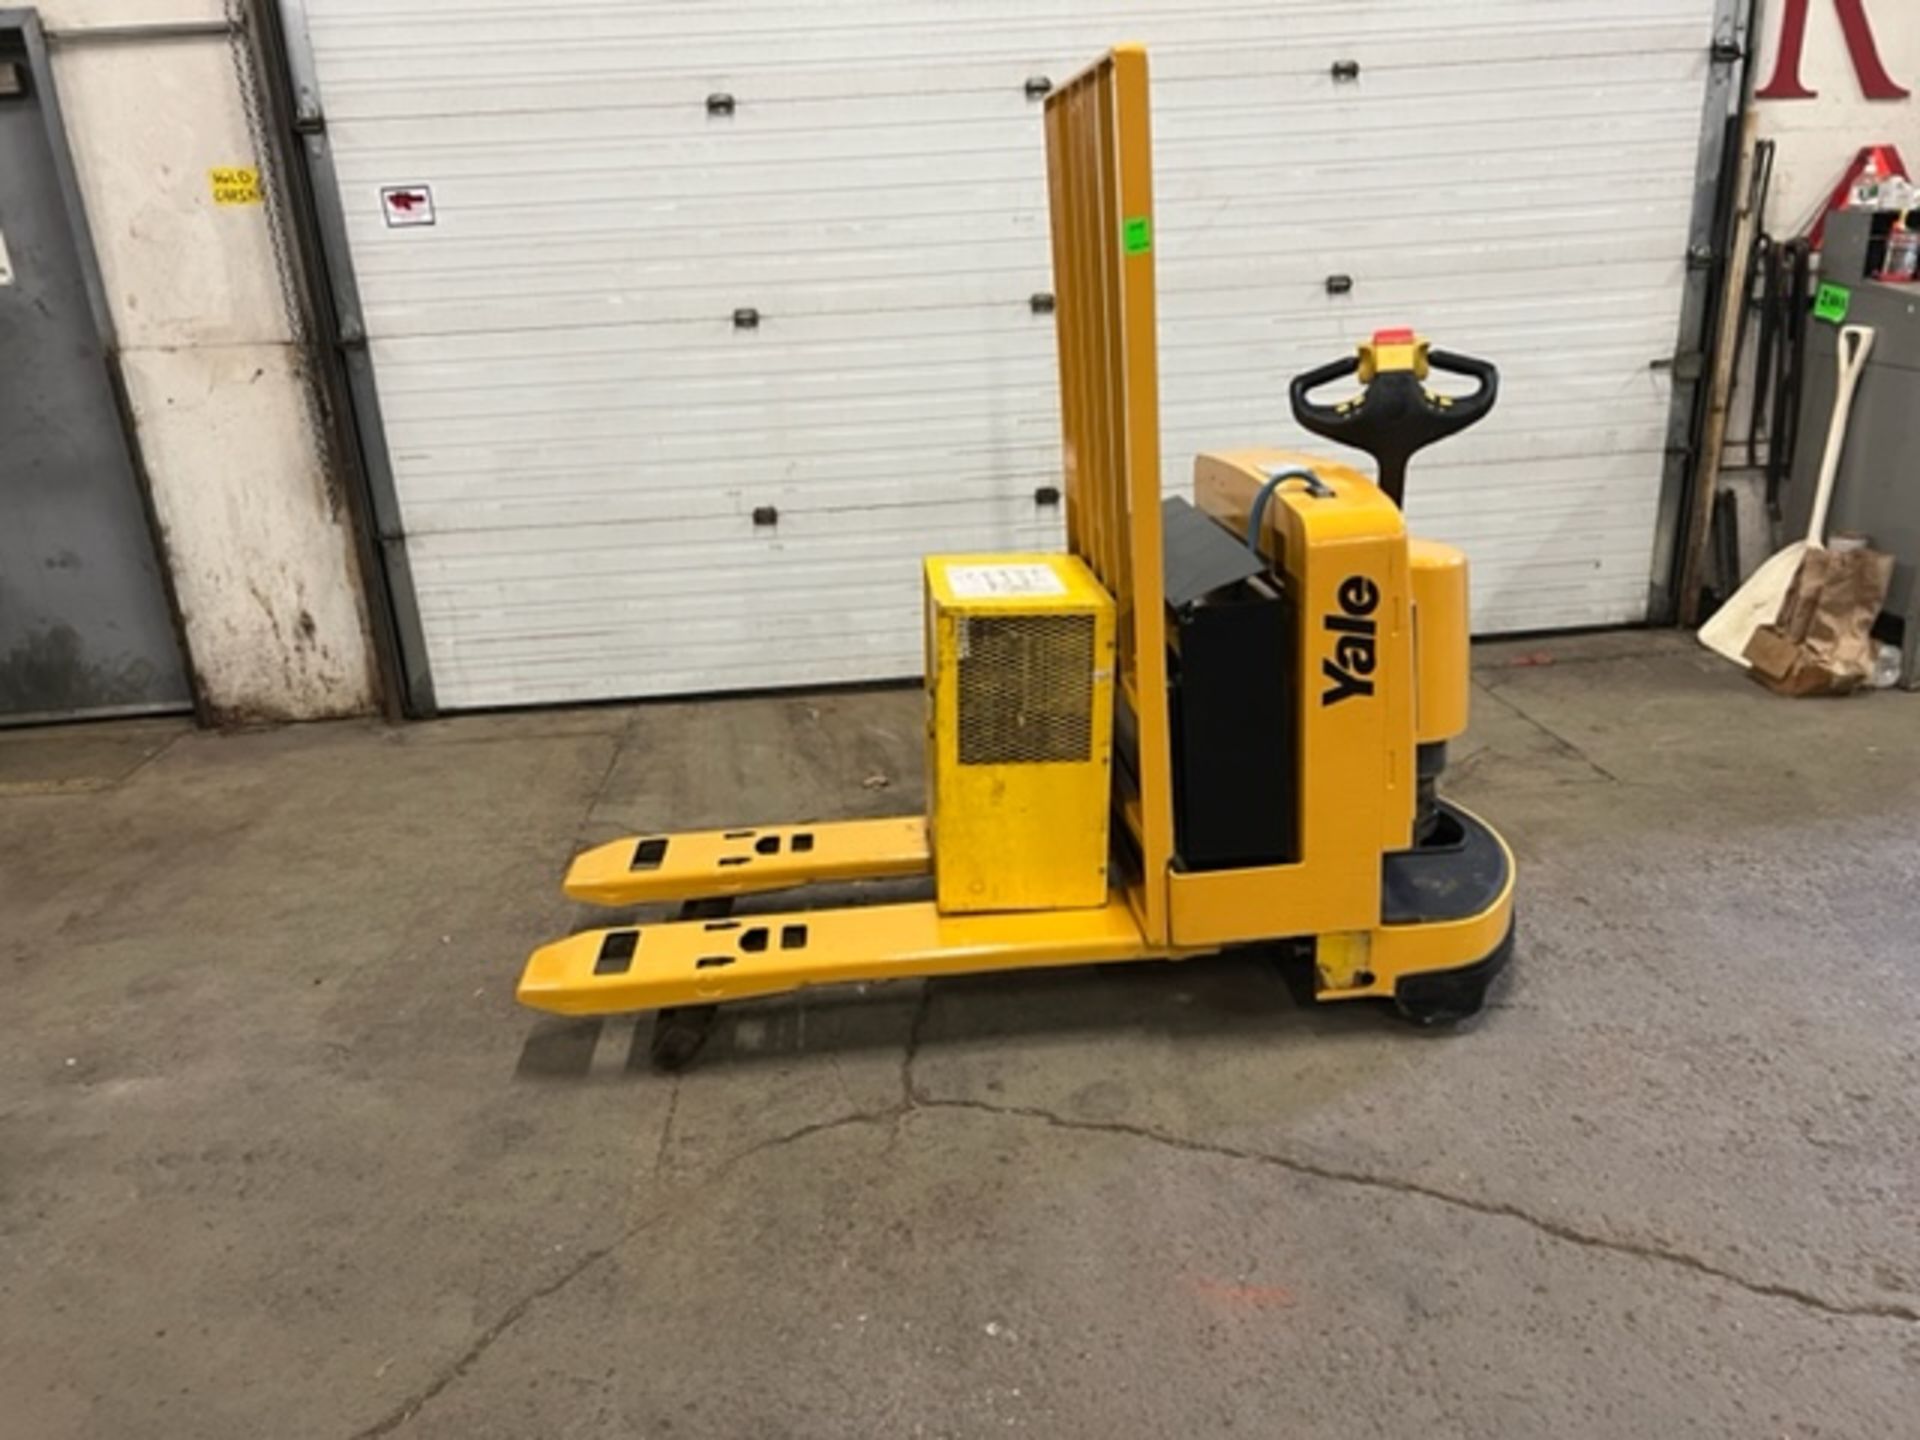 2005 Yale Walk Behind Electric Powered Pallet Cart Walkie Lift 6500lbs capacity MINT with Battery